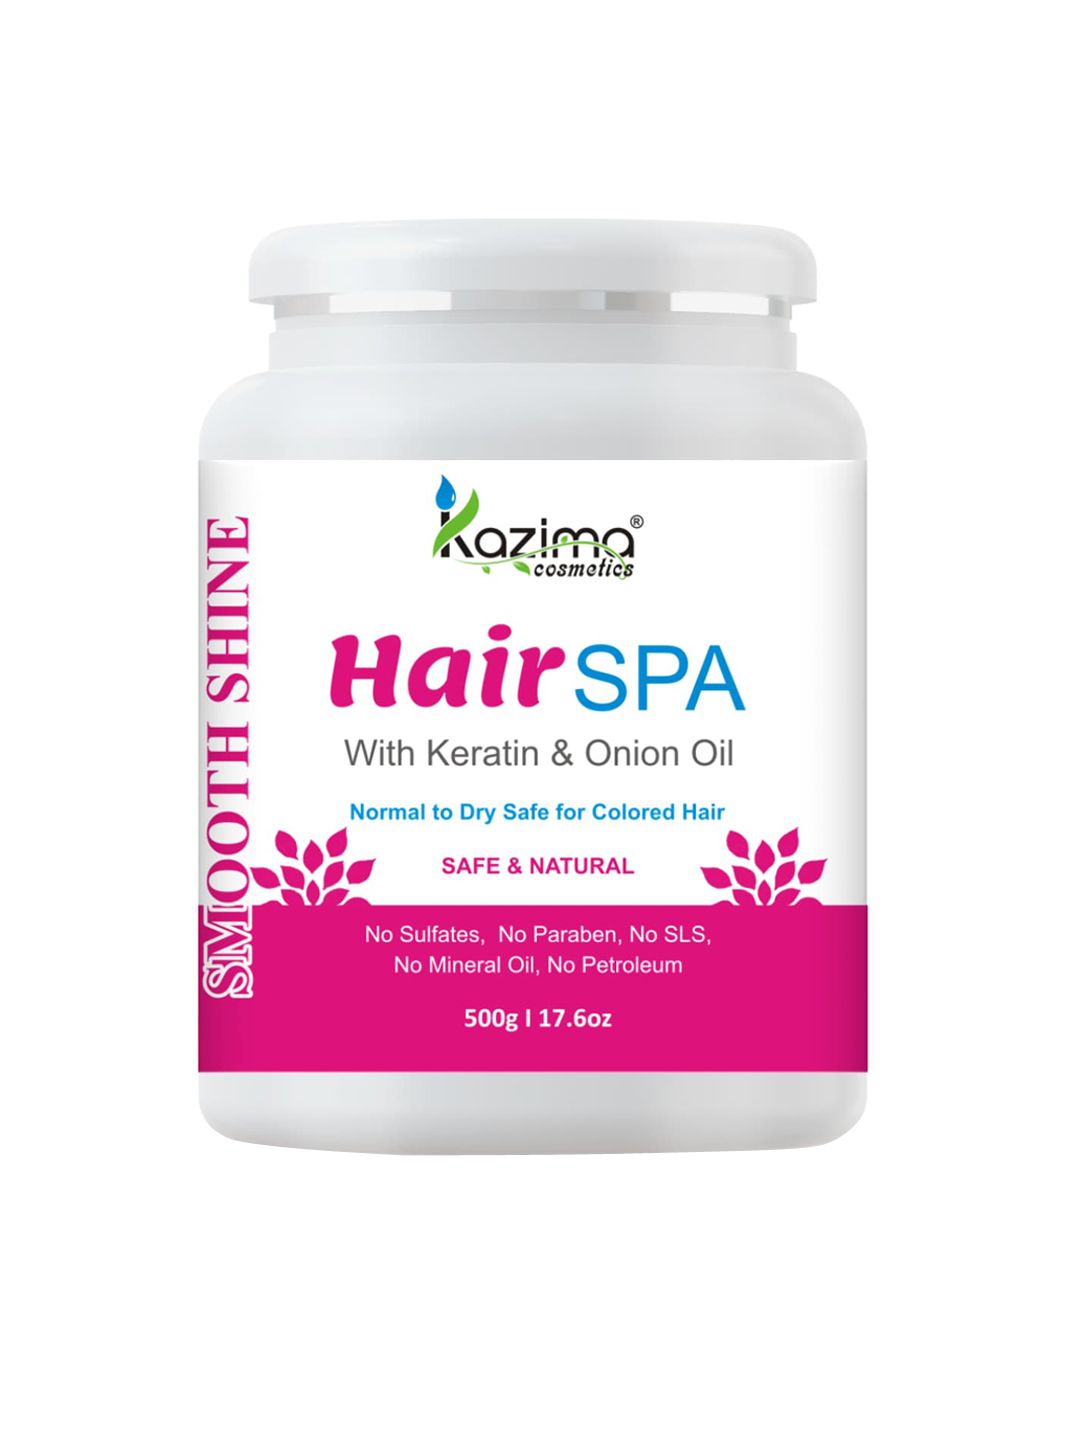 KAZIMA Hair SPA Cream with Keratin & Onion Oil for Smooth, Shiny & Silky Hair, 500g Price in India